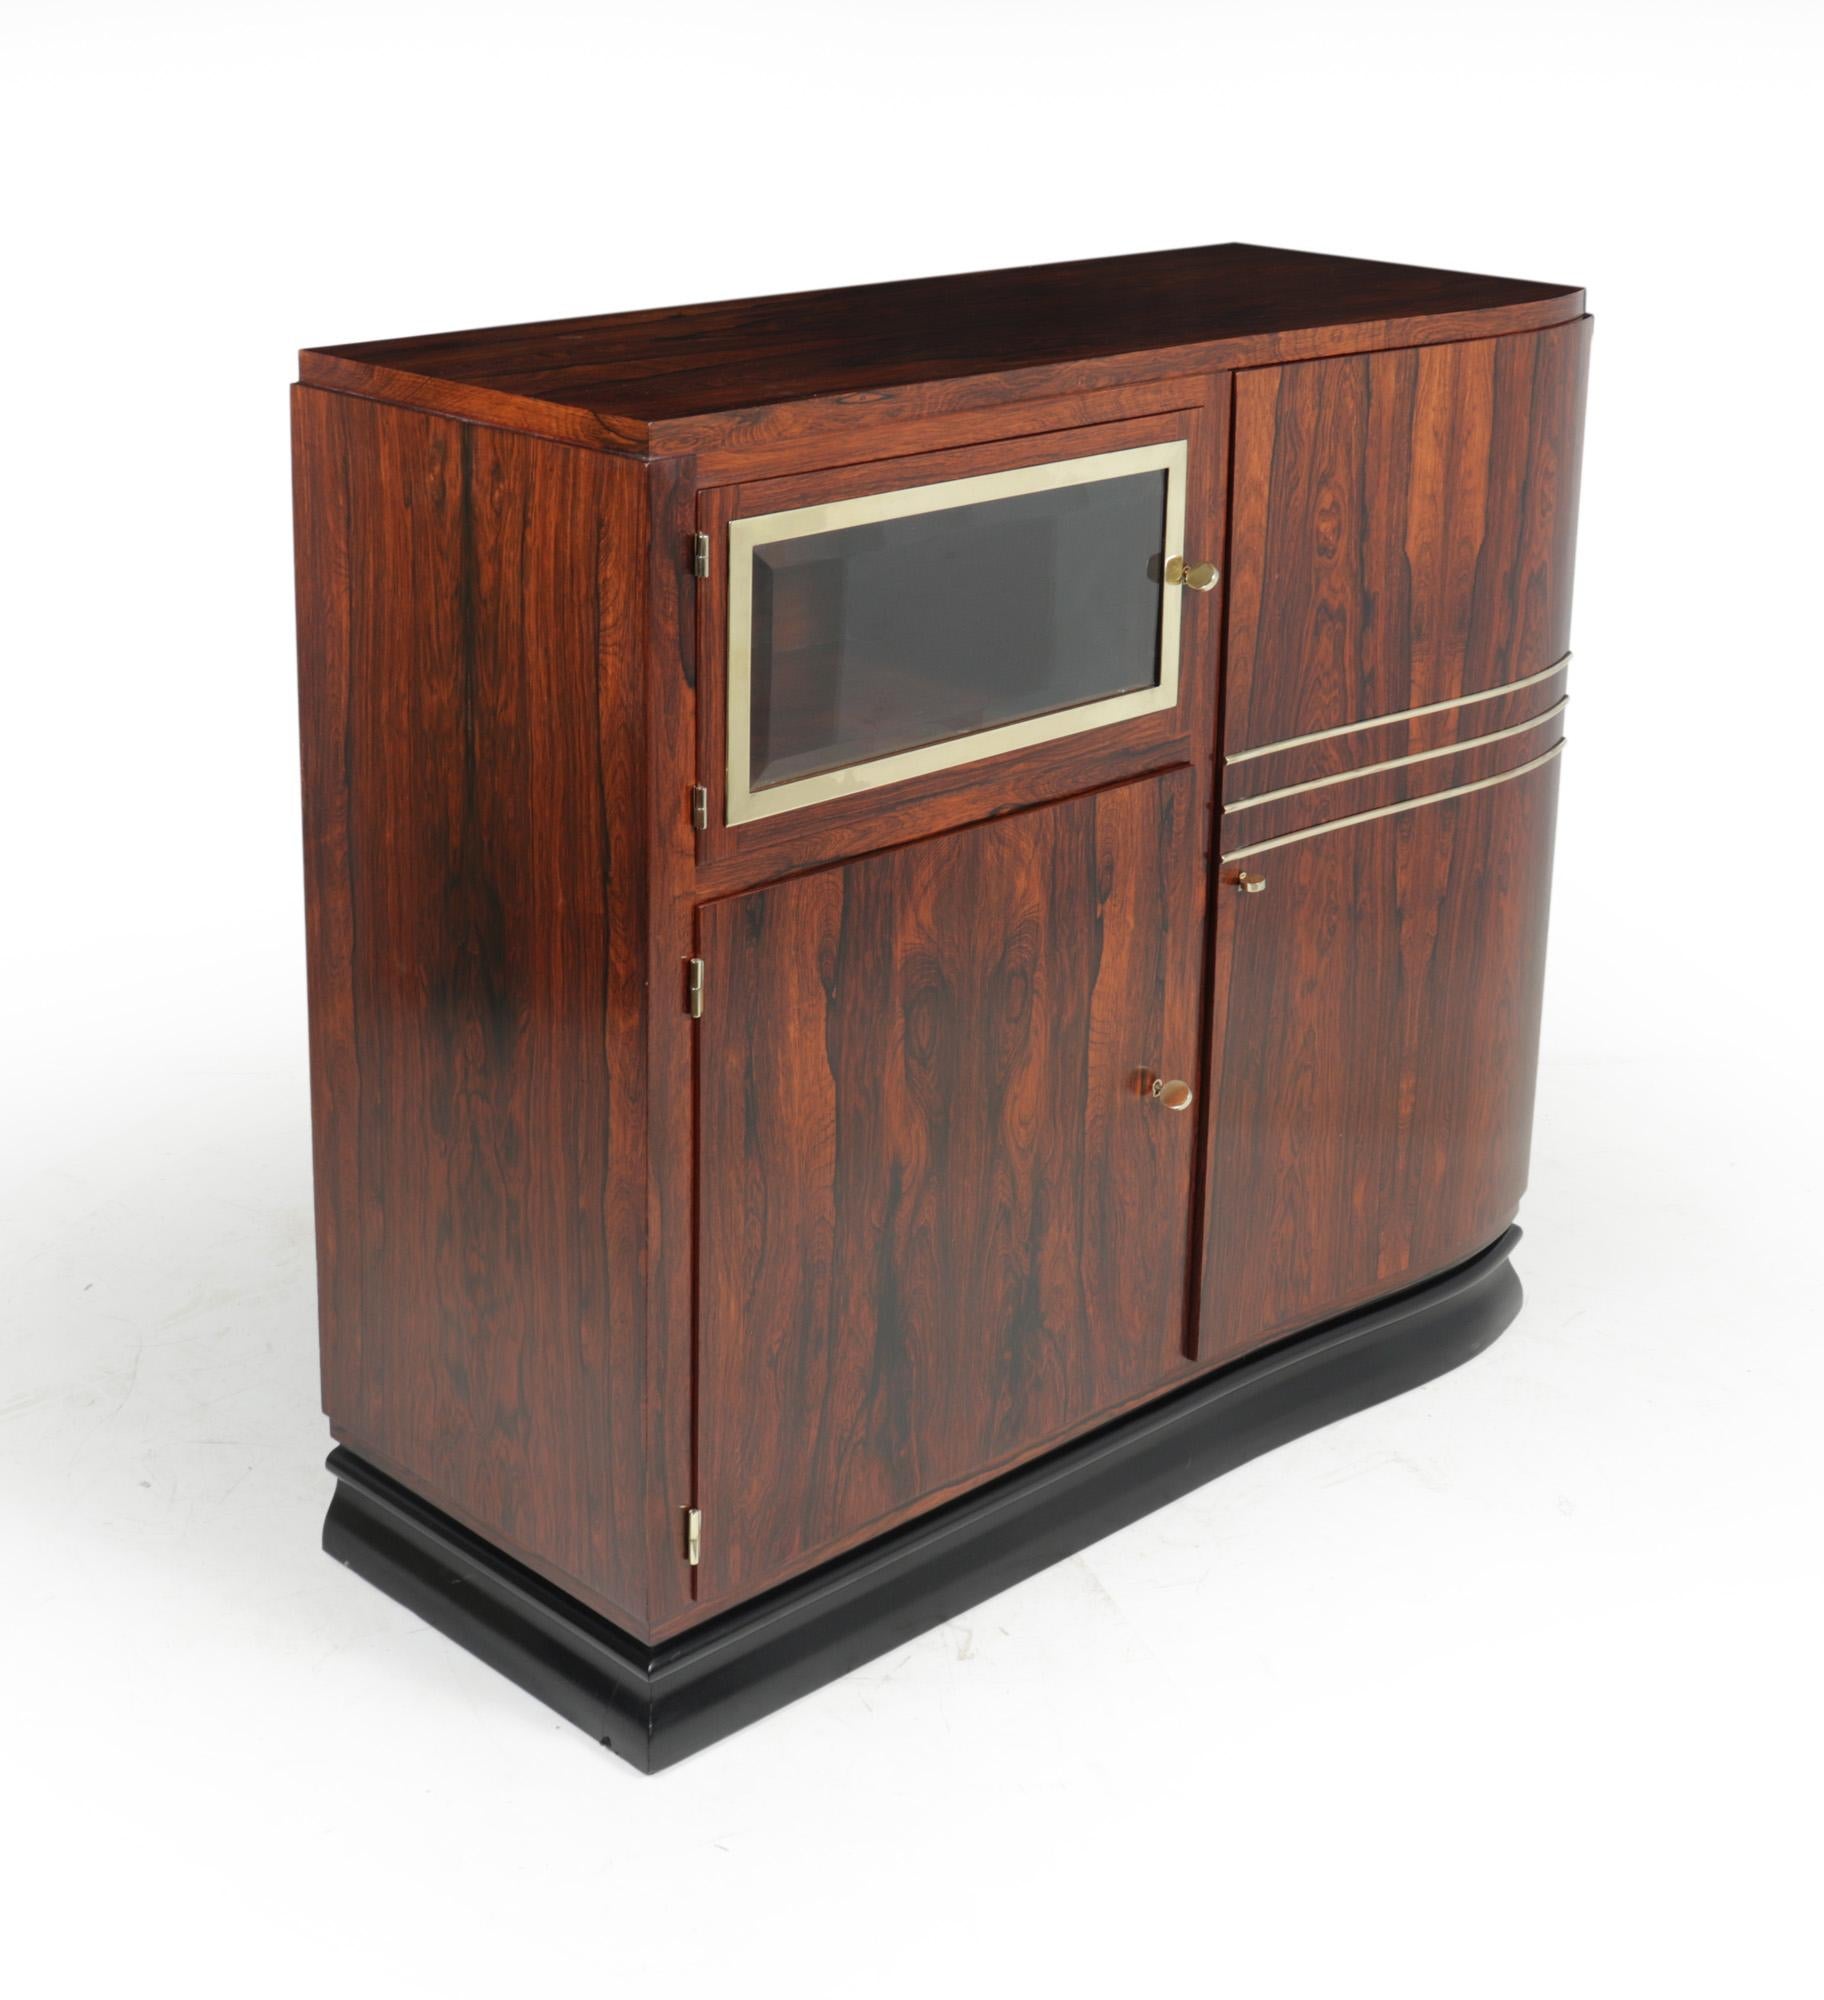 French Art Deco rosewood cabinet c1925
An excellent quality cabinet in rosewood with polished brass detail, working locks with three keys supplied the cabinet has three doors one of these has bevelled glass with brass surround, the cabinet has been